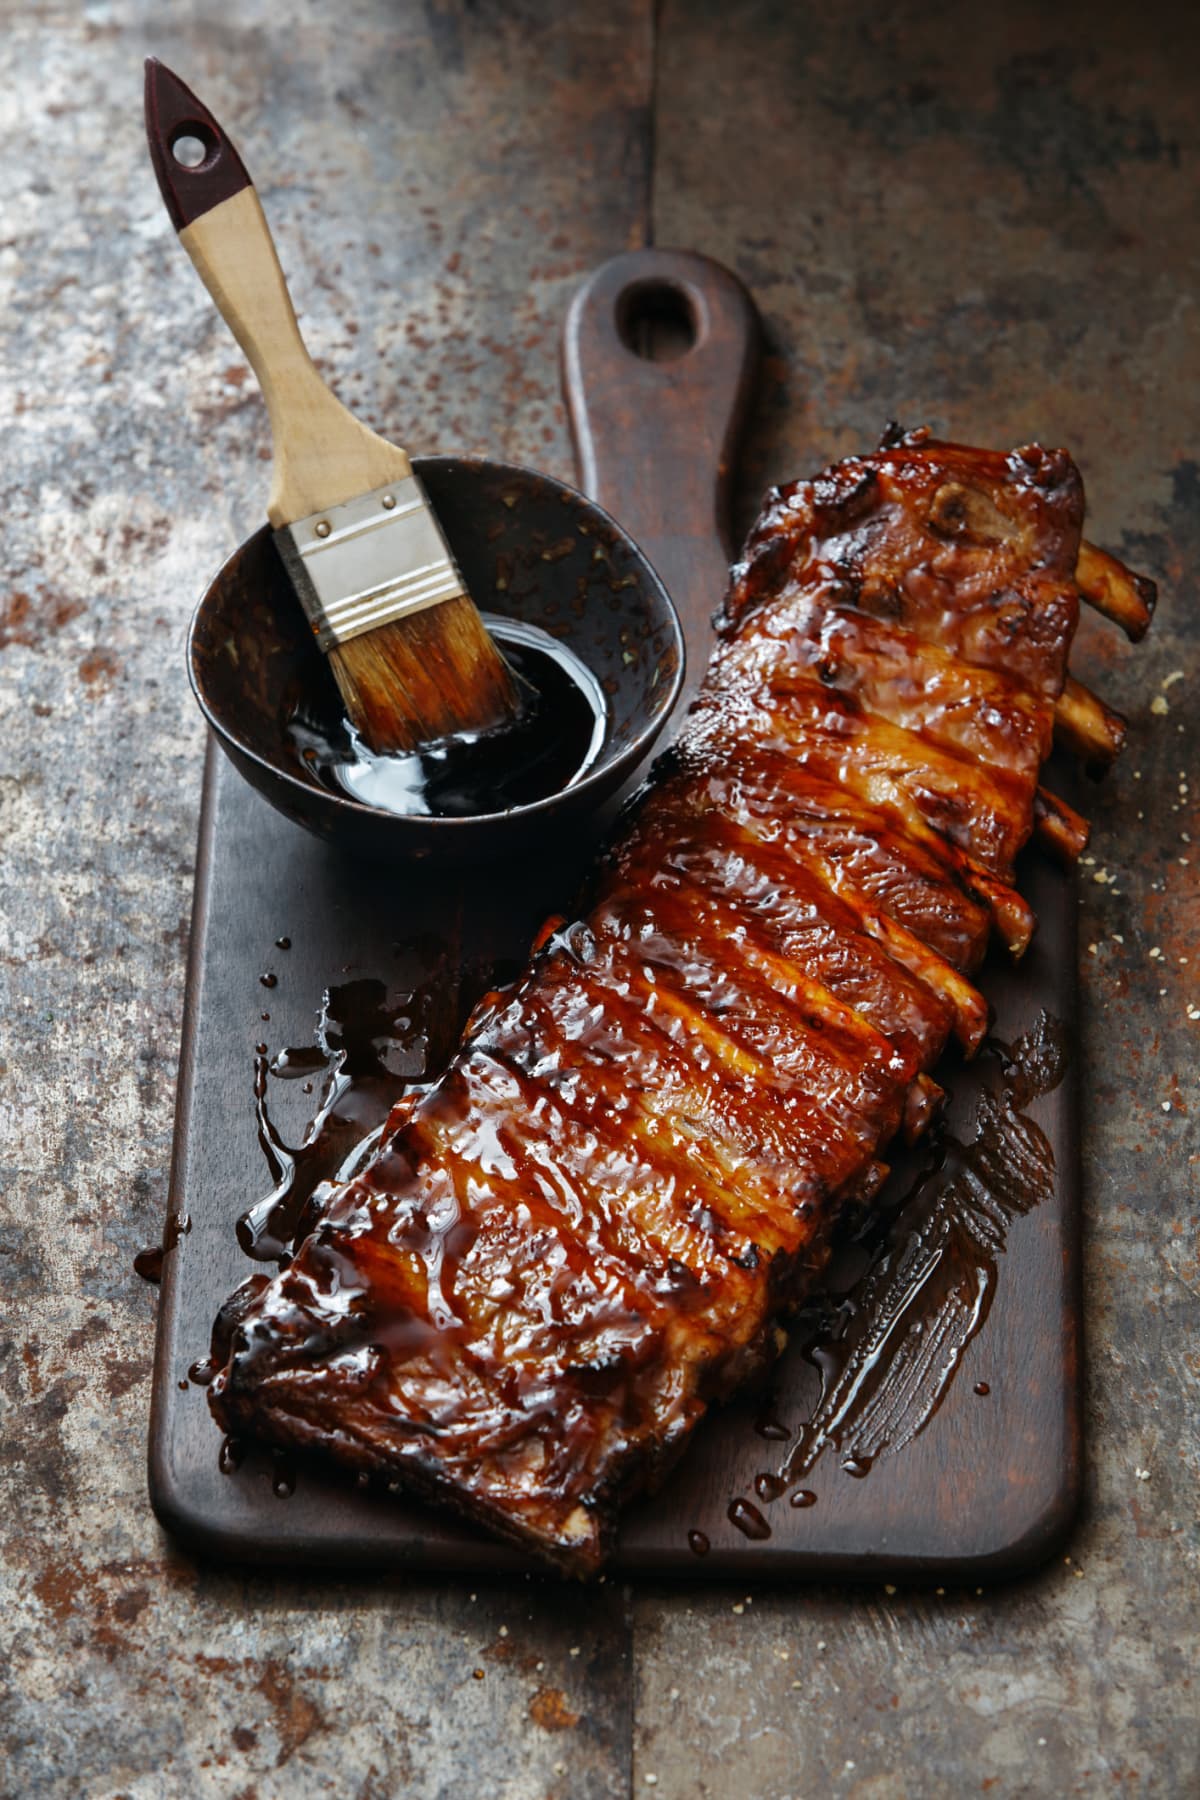 Pork ribs on a cutting board next to a bowl of sauce and a marinade brush